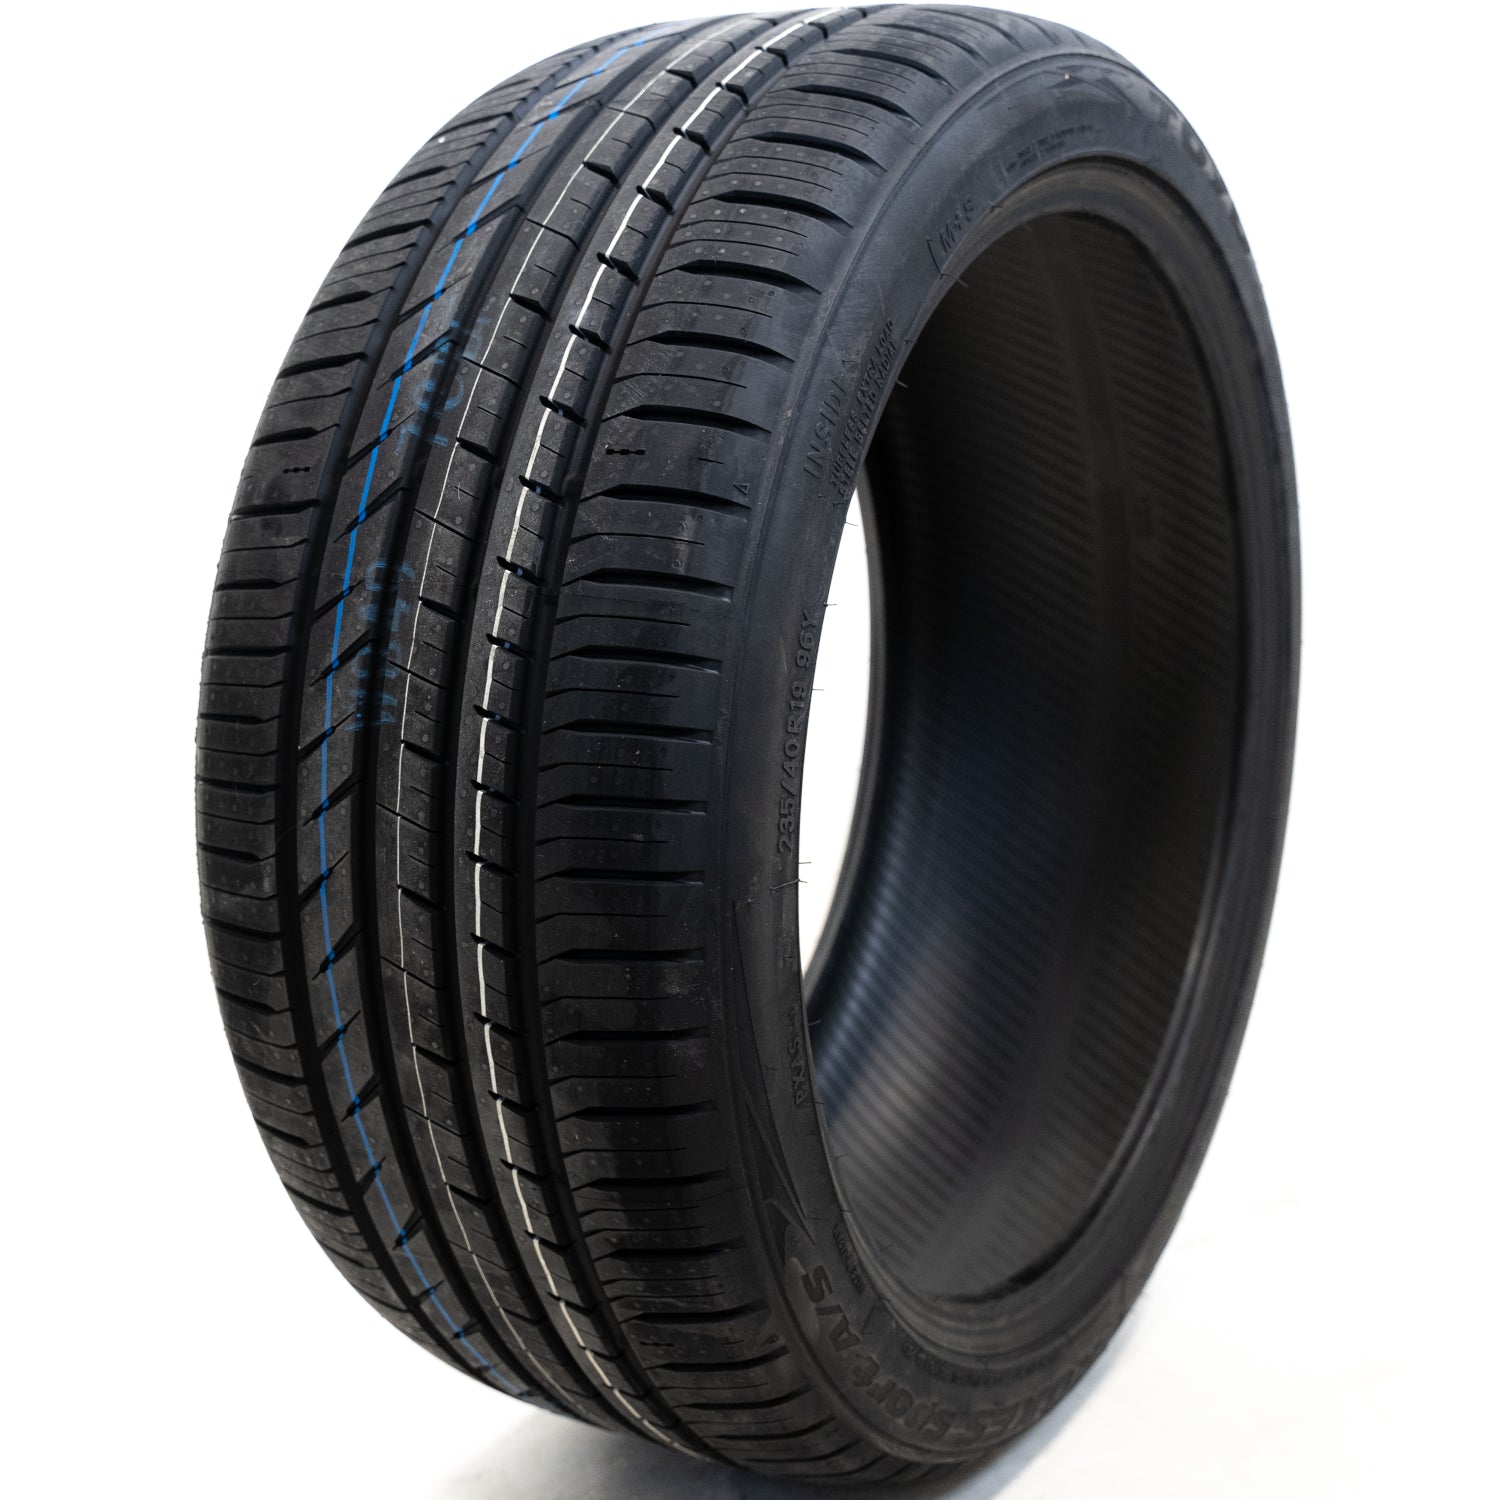 TOYO TIRES PROXES SPORT A/S 255/40R17XL (25X10R 17) Tires